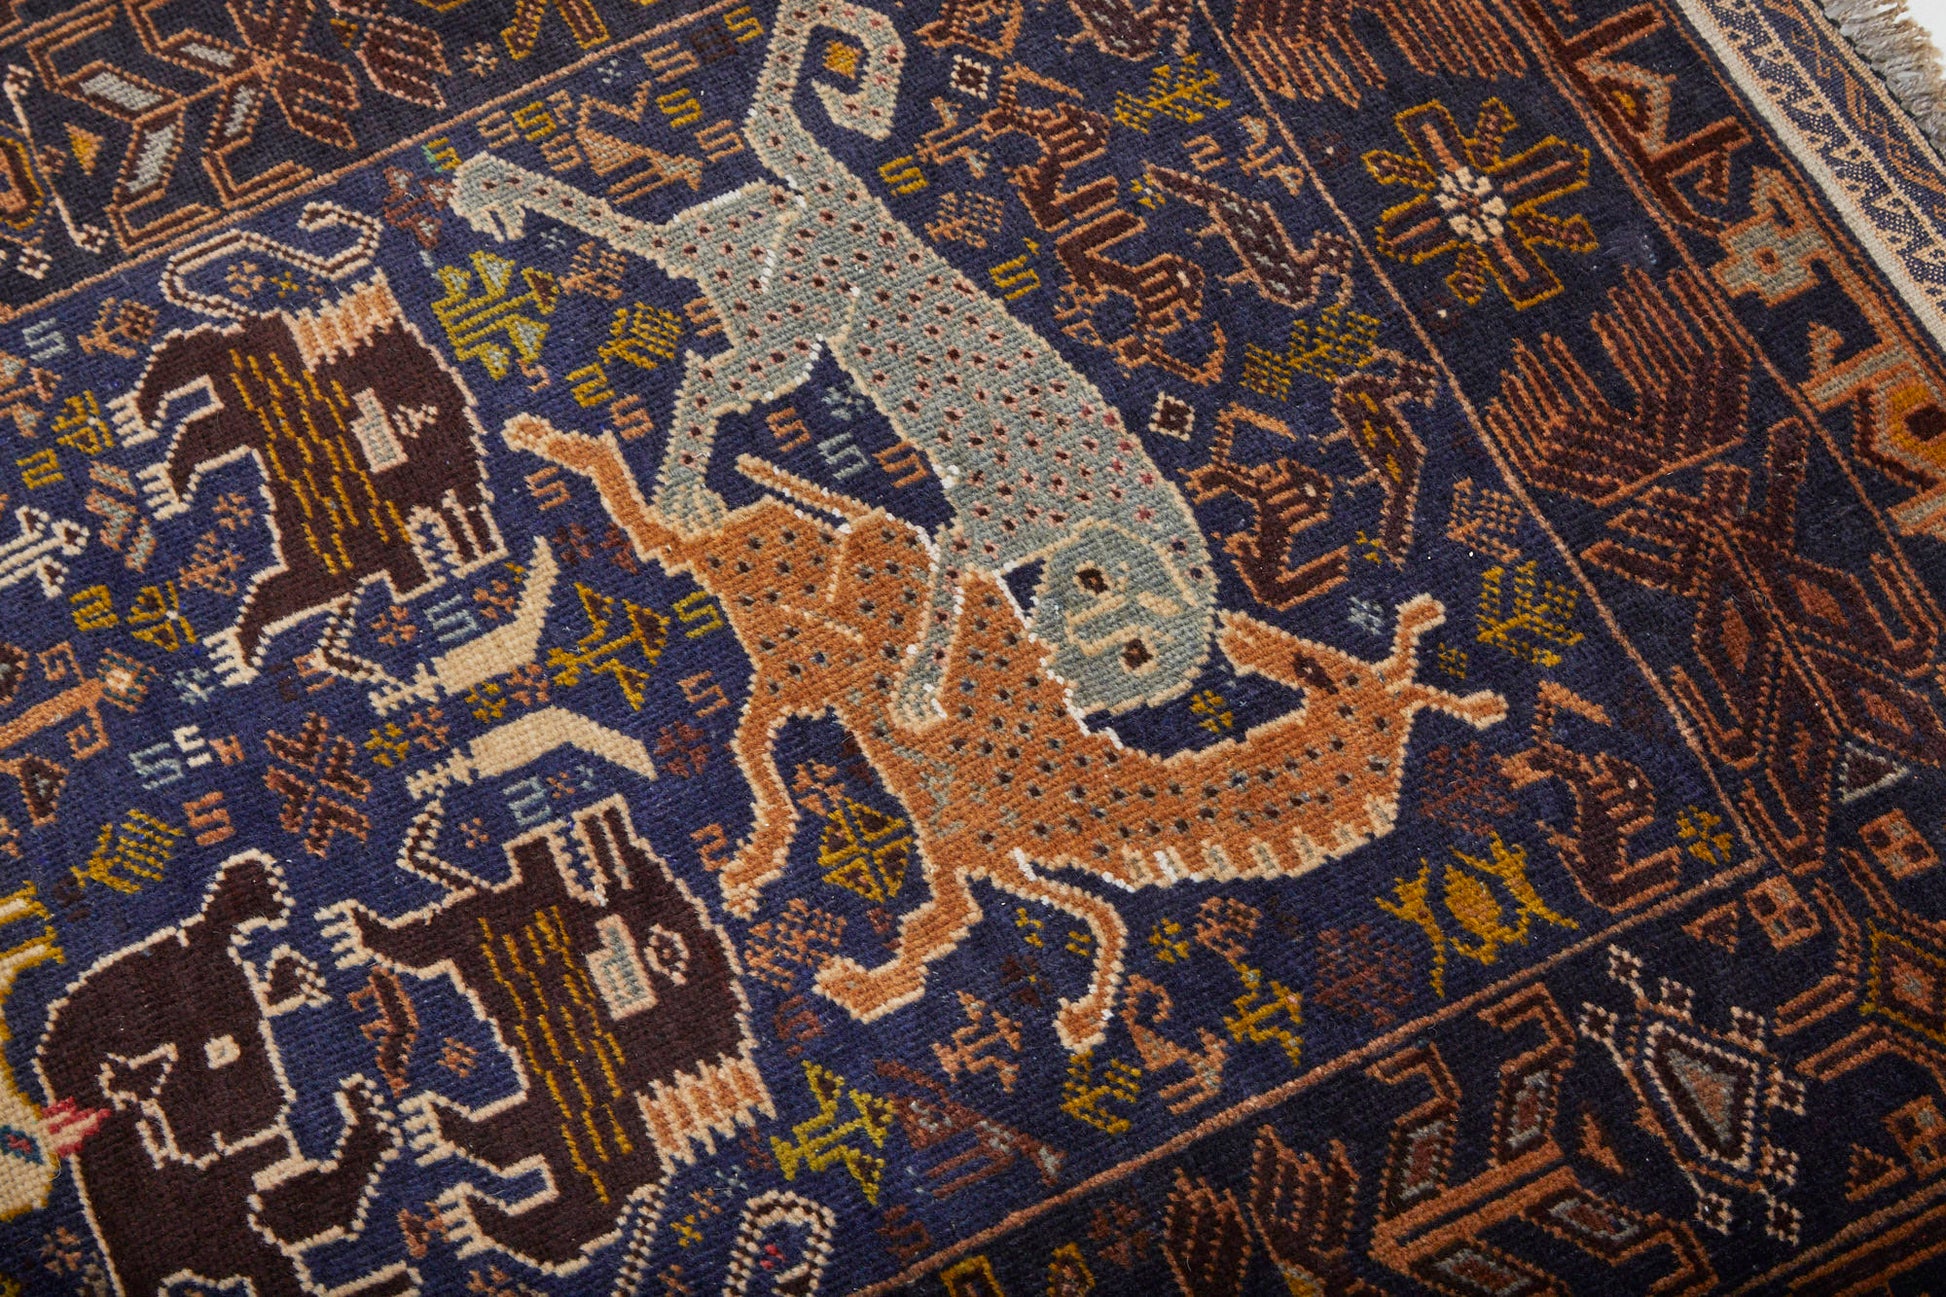 Detail of hand woven Afghan Shikargah pictorial rug depicting leopard or tiger attacking a deer on dark blue background, surrounded by symbols -  Available from King Kennedy Rugs Los Angeles